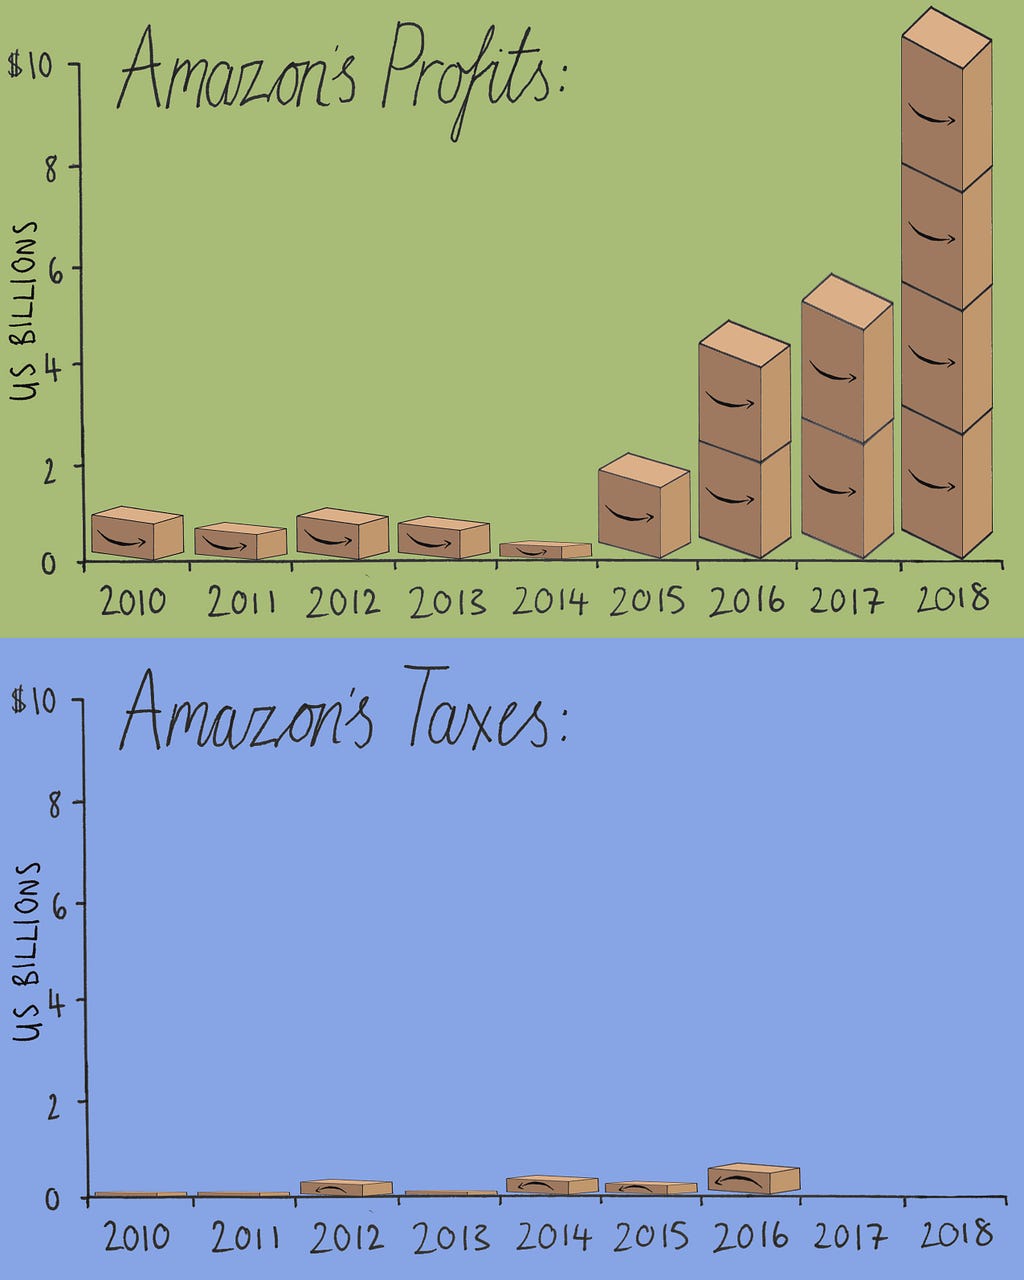 two illustrations of Amazon’s profits and taxes from 2010 to 2018